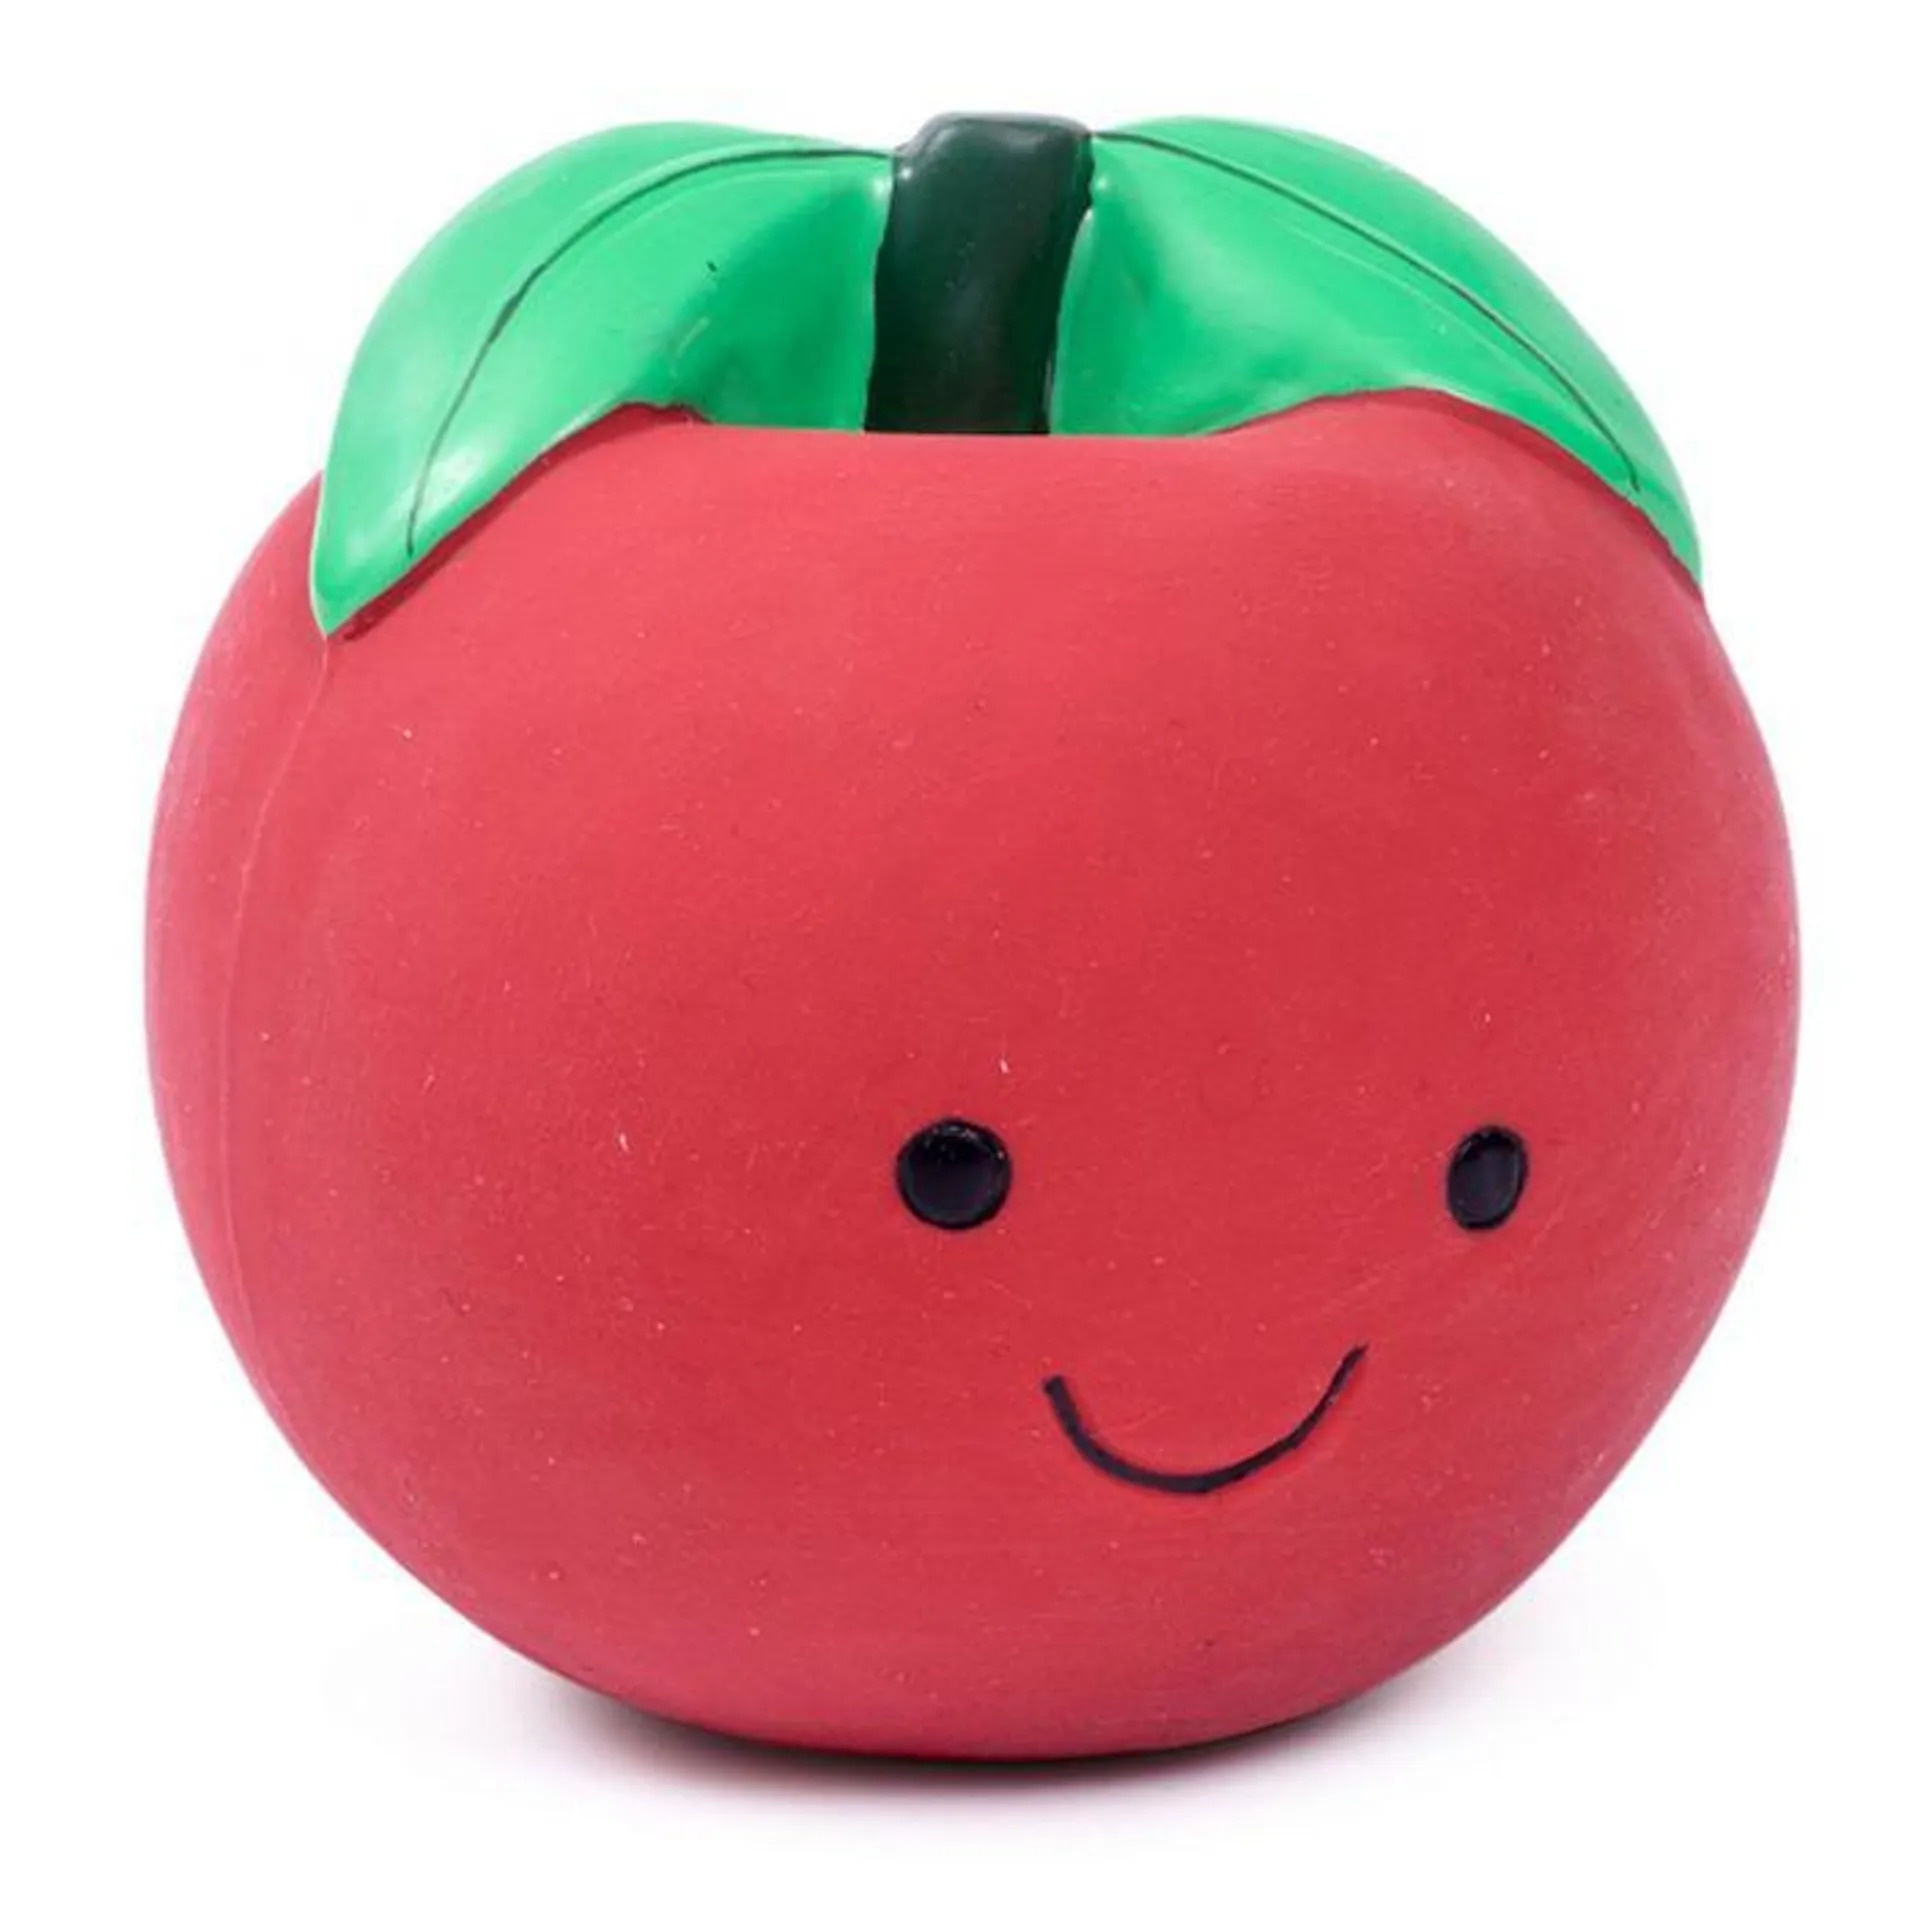 Petface Foodie Faces - Tomato (Large)